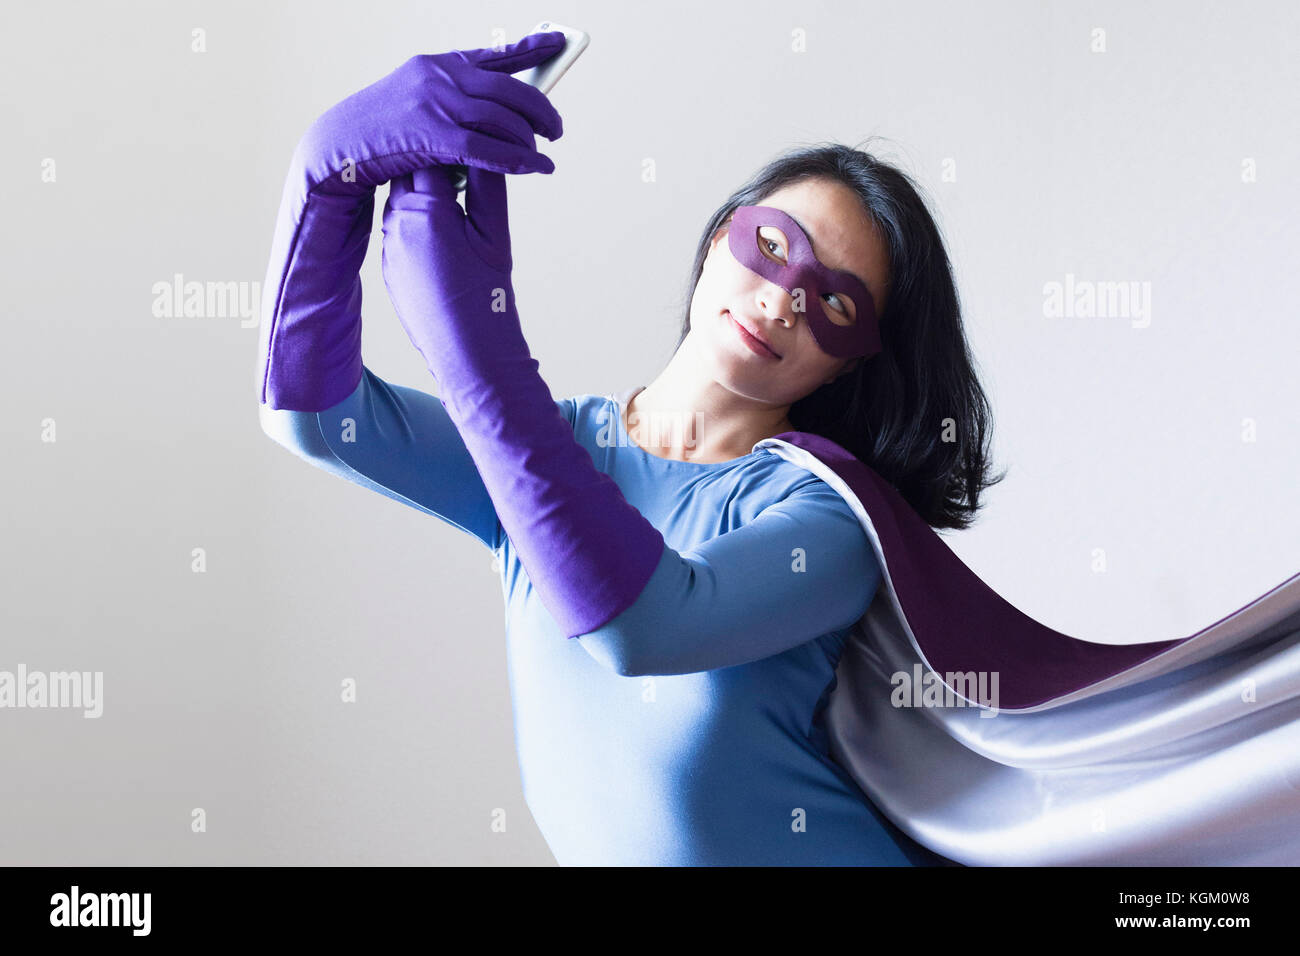 Young woman dressed as superhero taking selfie against white background Stock Photo